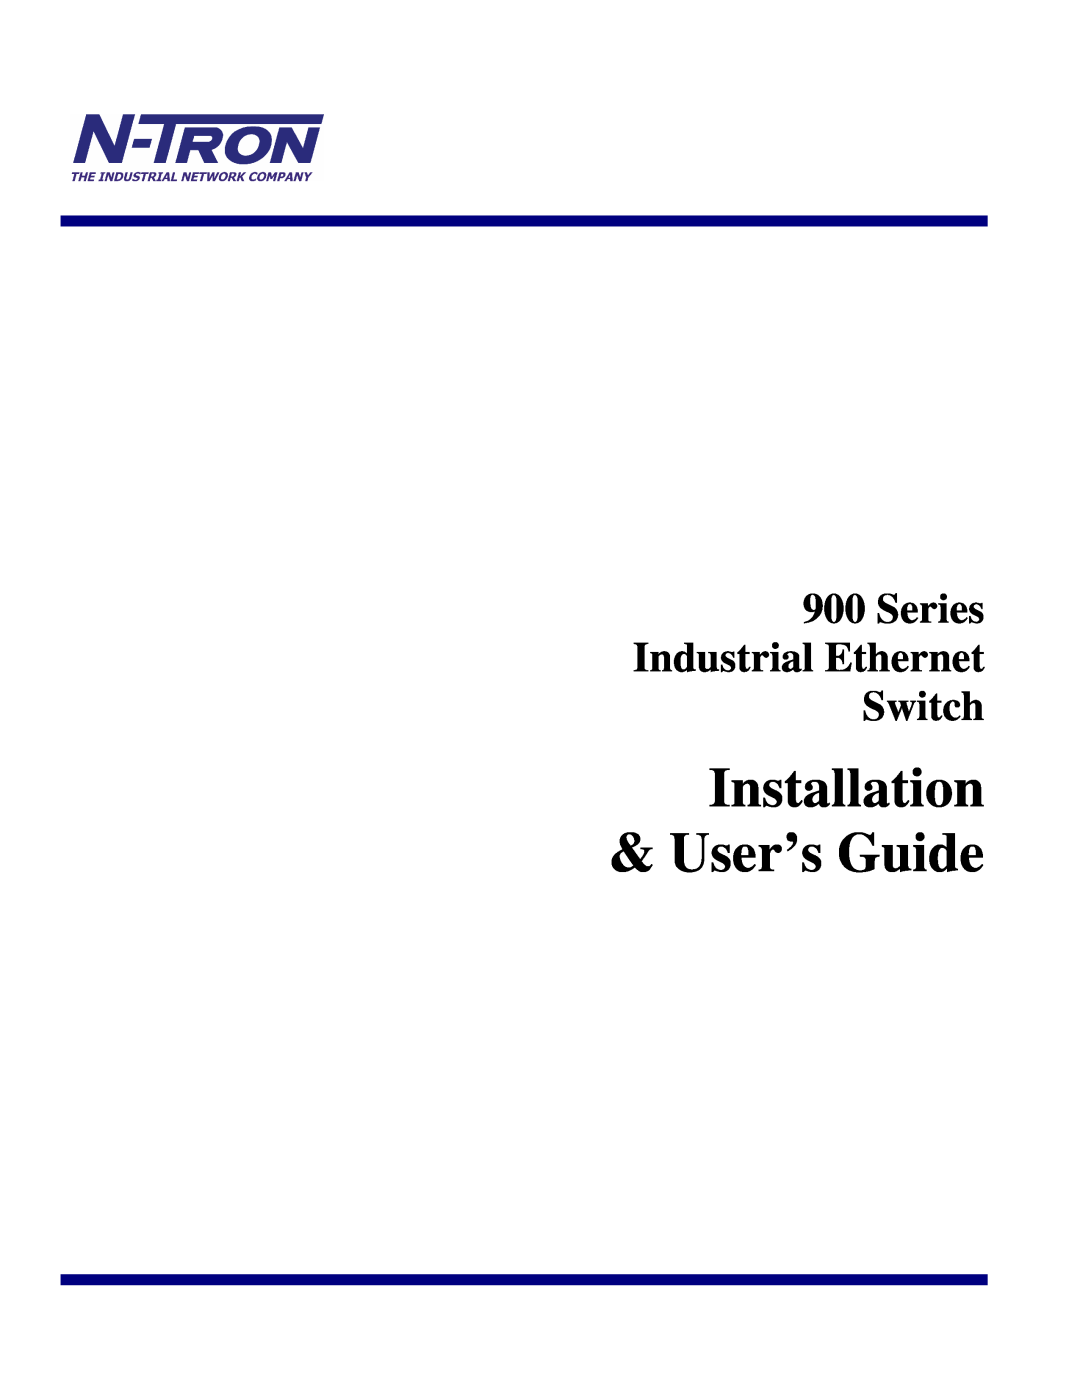 N-Tron 900 manual Installation & User’s Guide, Series Industrial Ethernet Switch 